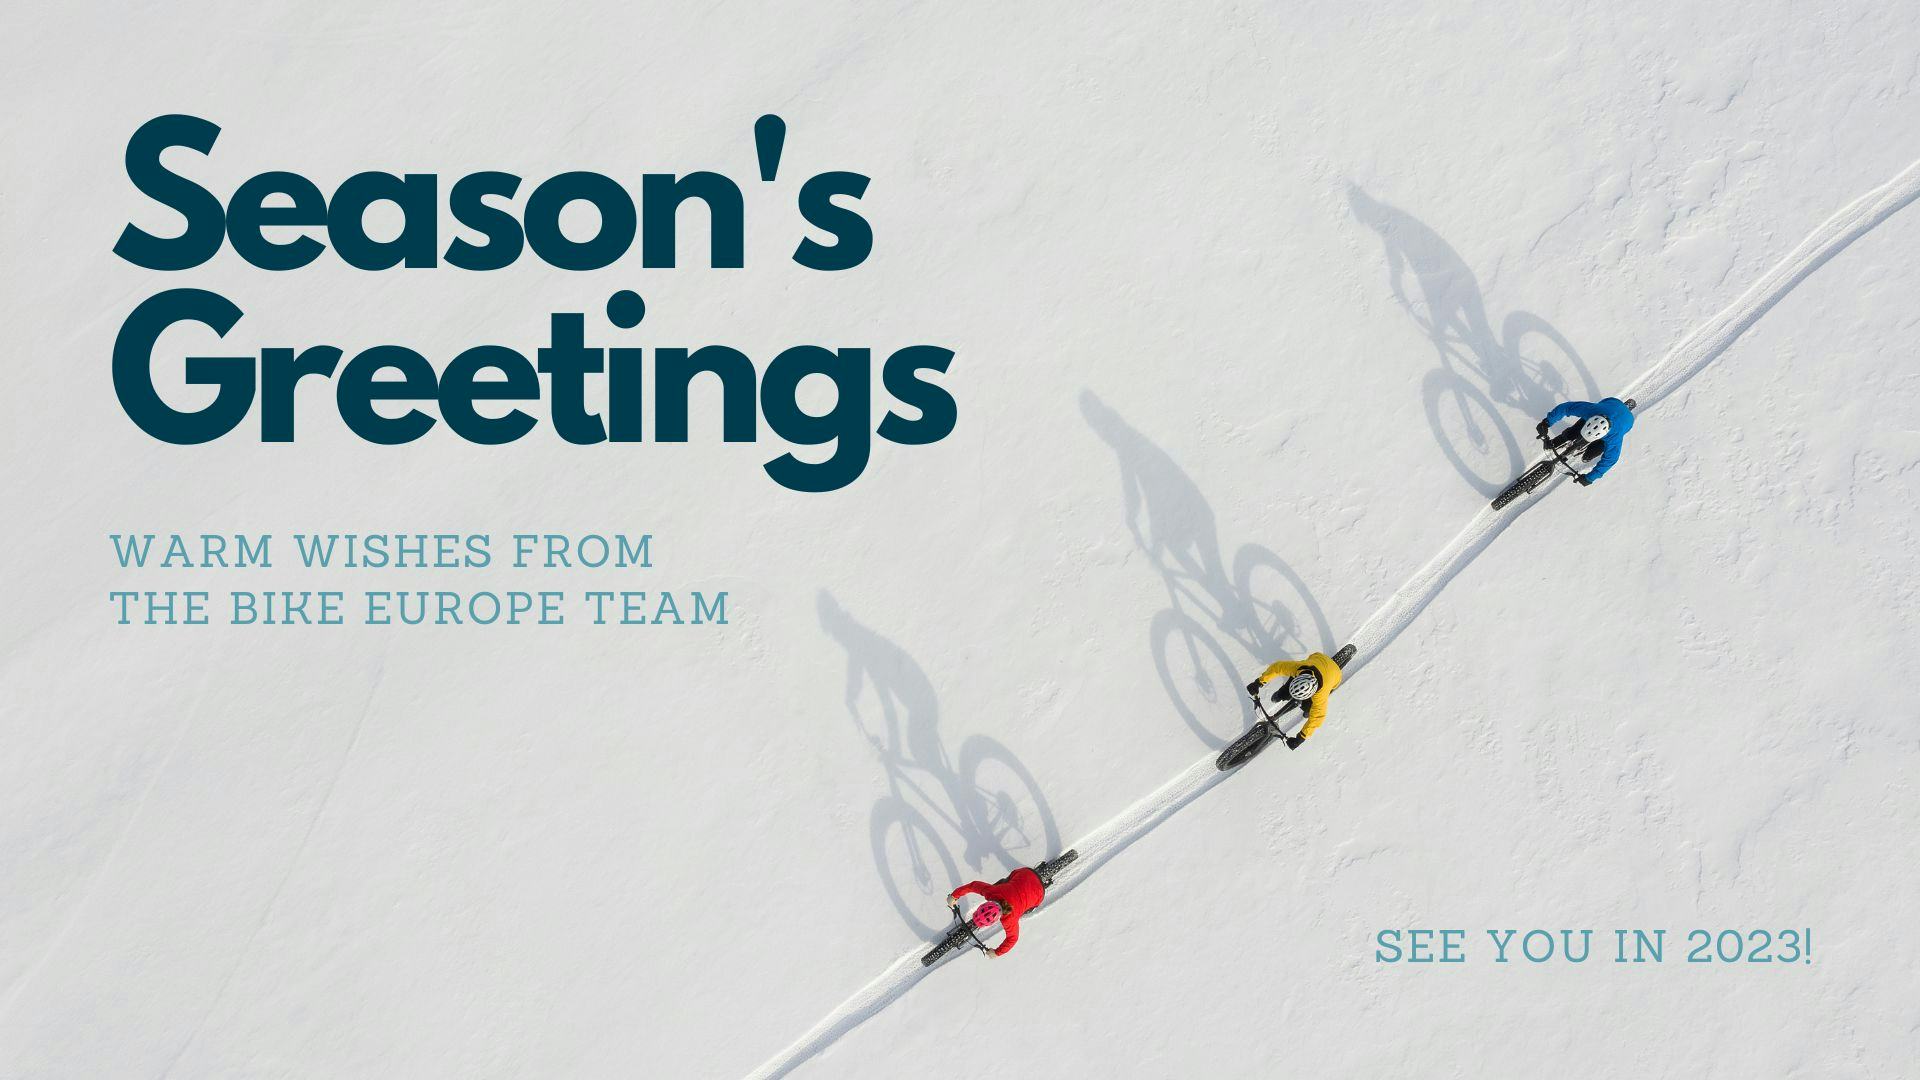 Happy Holidays from the Bike Europe team!